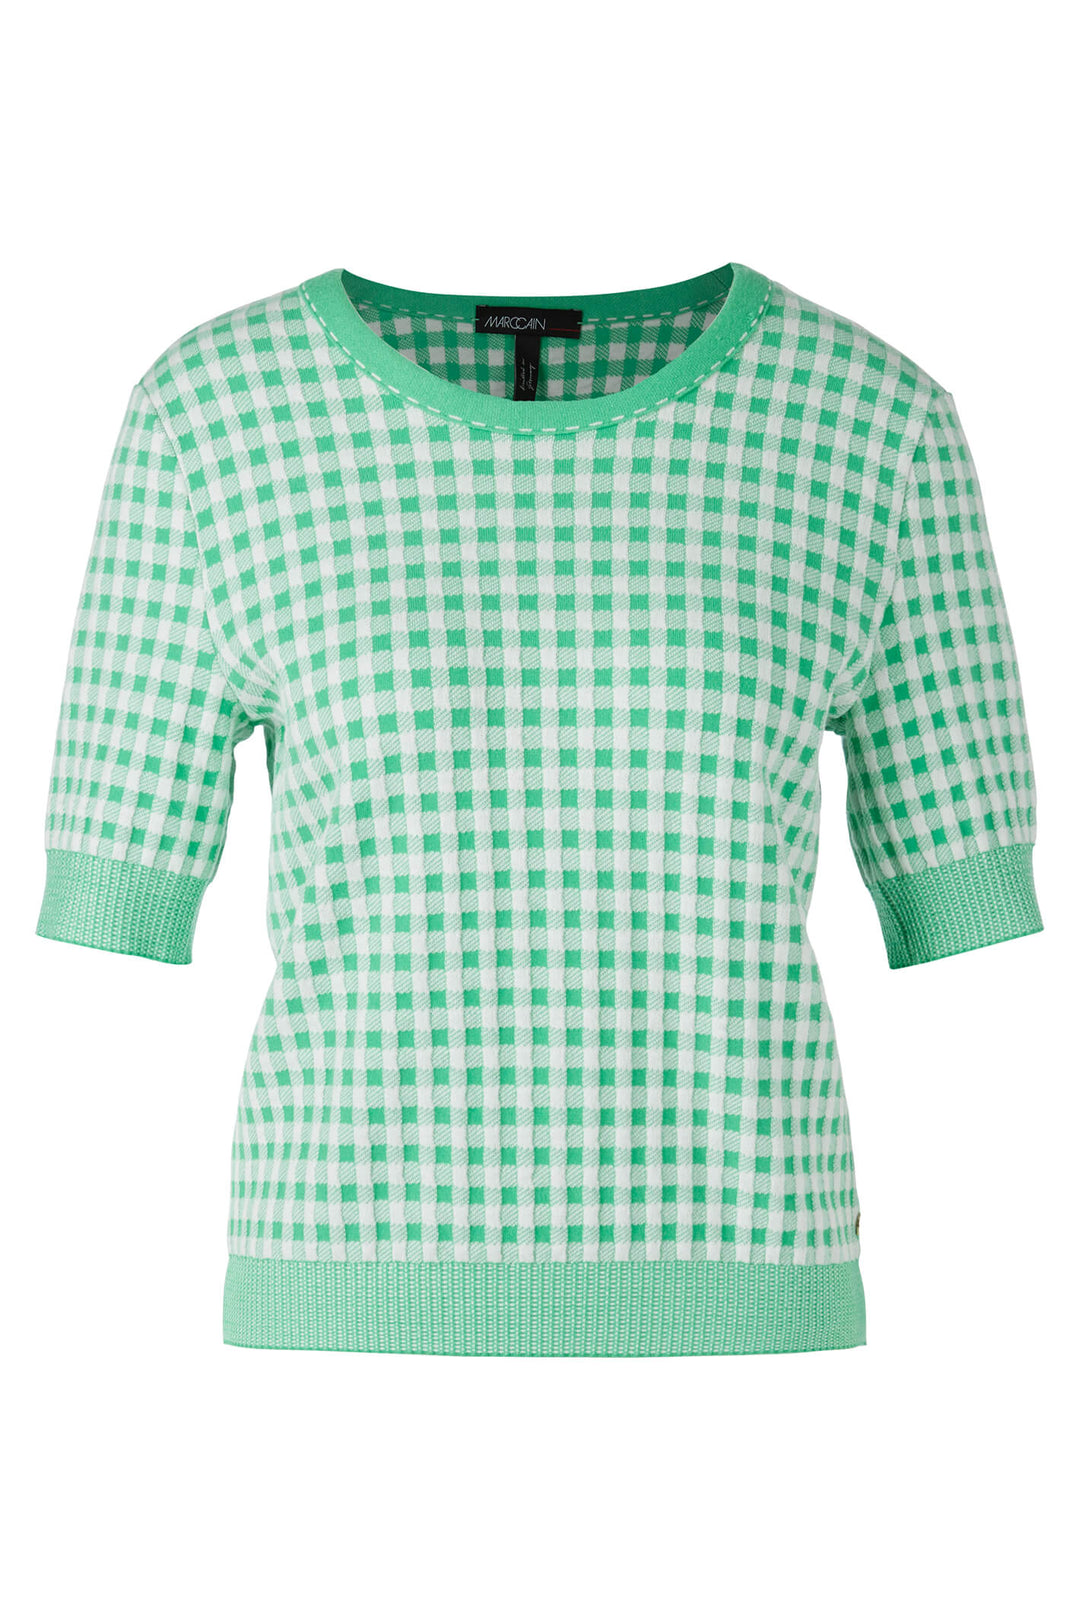 Marc Cain Collection UC 41.25 M13 Bright Jade Green Check Jumper - Olivia Grace Fashion